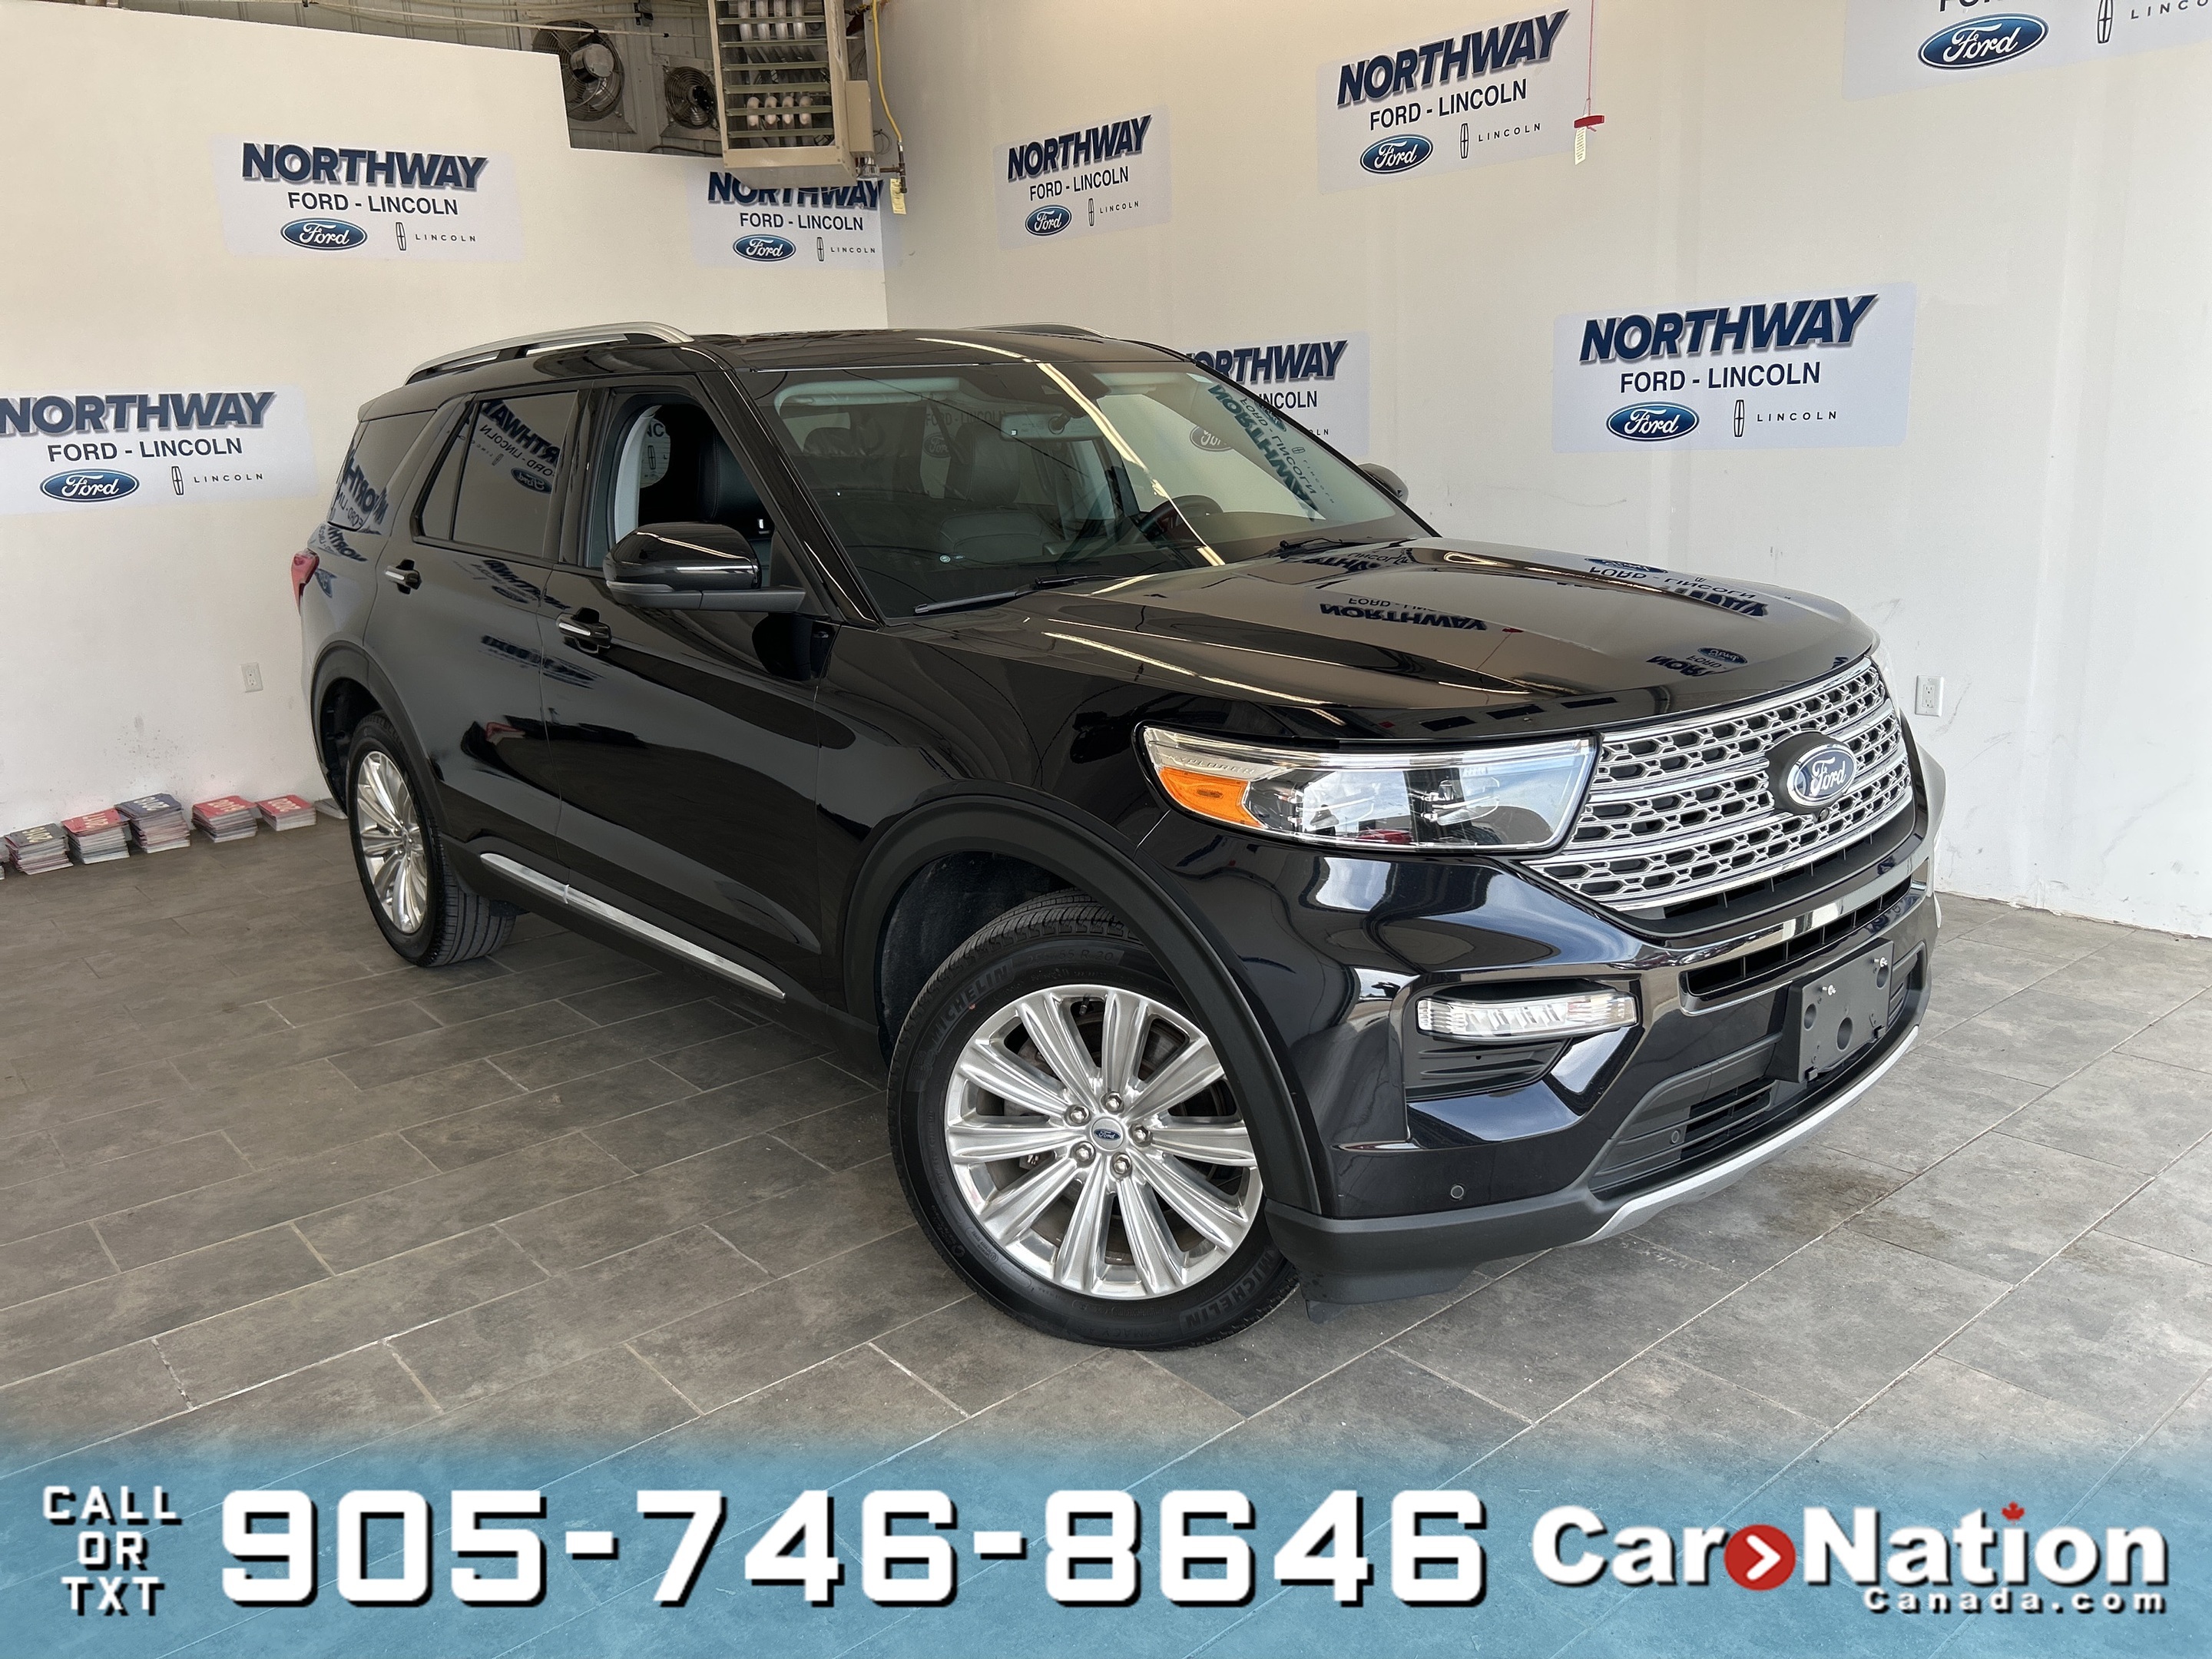 2021 Ford Explorer LIMITED | HYBRID | 4X4 | LEATHER | PANO ROOF | NAV